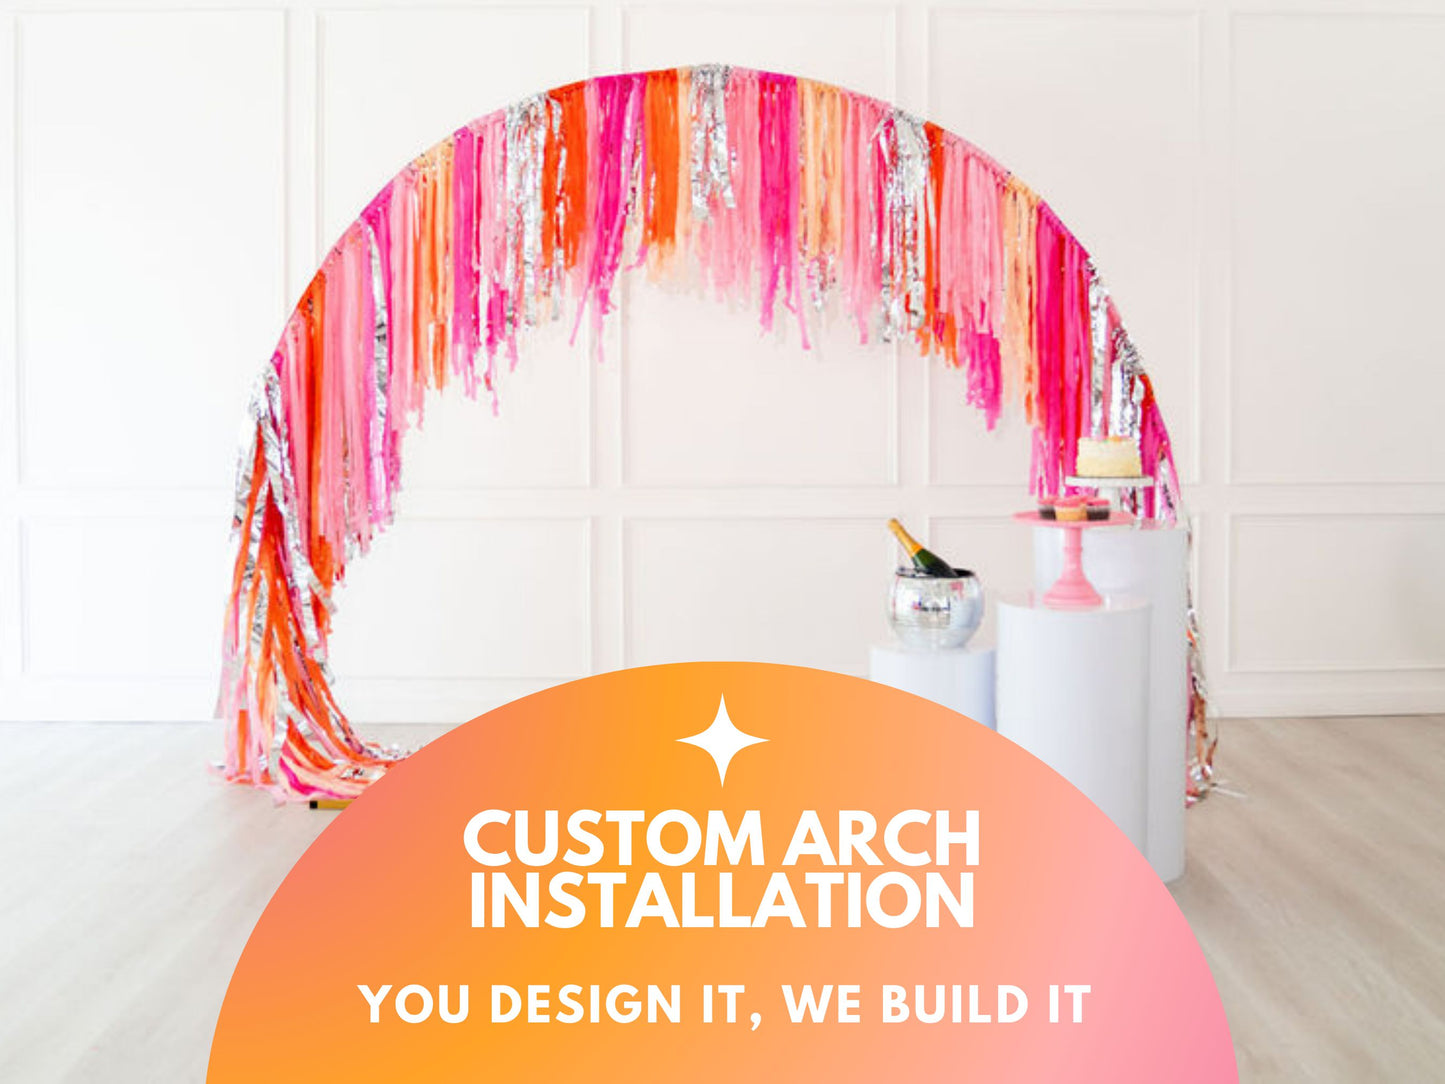 Custom Arched Fringe Installation-Fringe Backdrop-Party Decor-Oh My Darling Party Co-Oh My Darling Party Co-aerial, arch, bachelorette party, backdrops for party, balloon garlands, be my valentine, Birthday Party, boy party, bridal party, candy pink, ceiling, custom overhead, engagement party, fringe garland, Fringe Streamers, garden party, girl party, gn party, indian wedding, metallic backdrop, new years, OMDPC, overhea, overhead, overheads, party backdrops, pink bachelorette, PINK BACKDROP, pink party, p